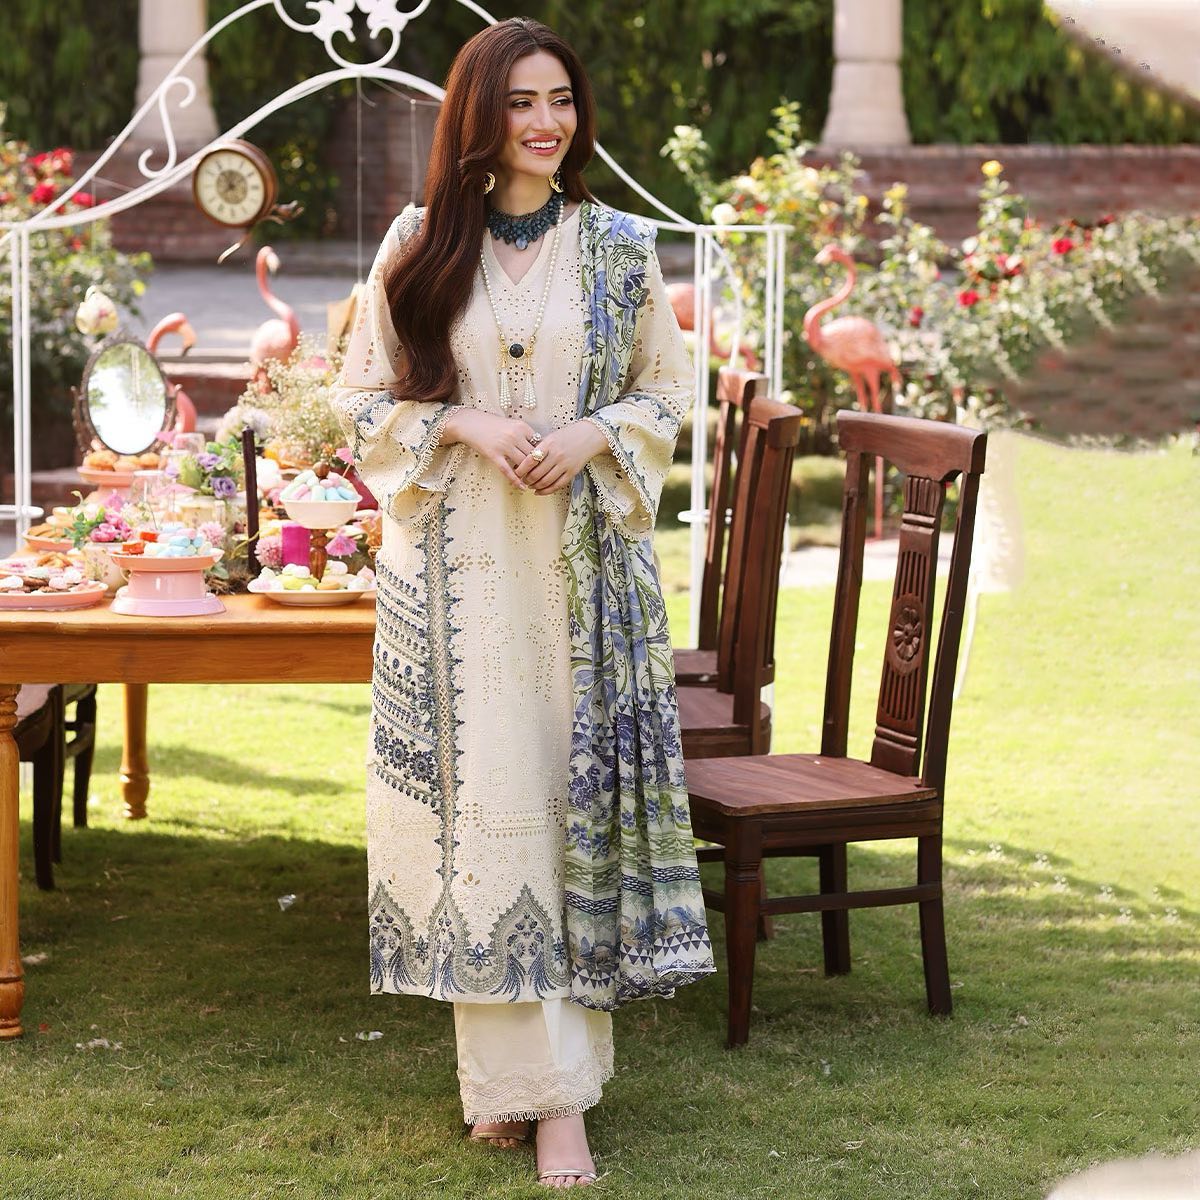 Sana Javed Turns on the Charm in Mint-Green Jora [Pictures] - Lens